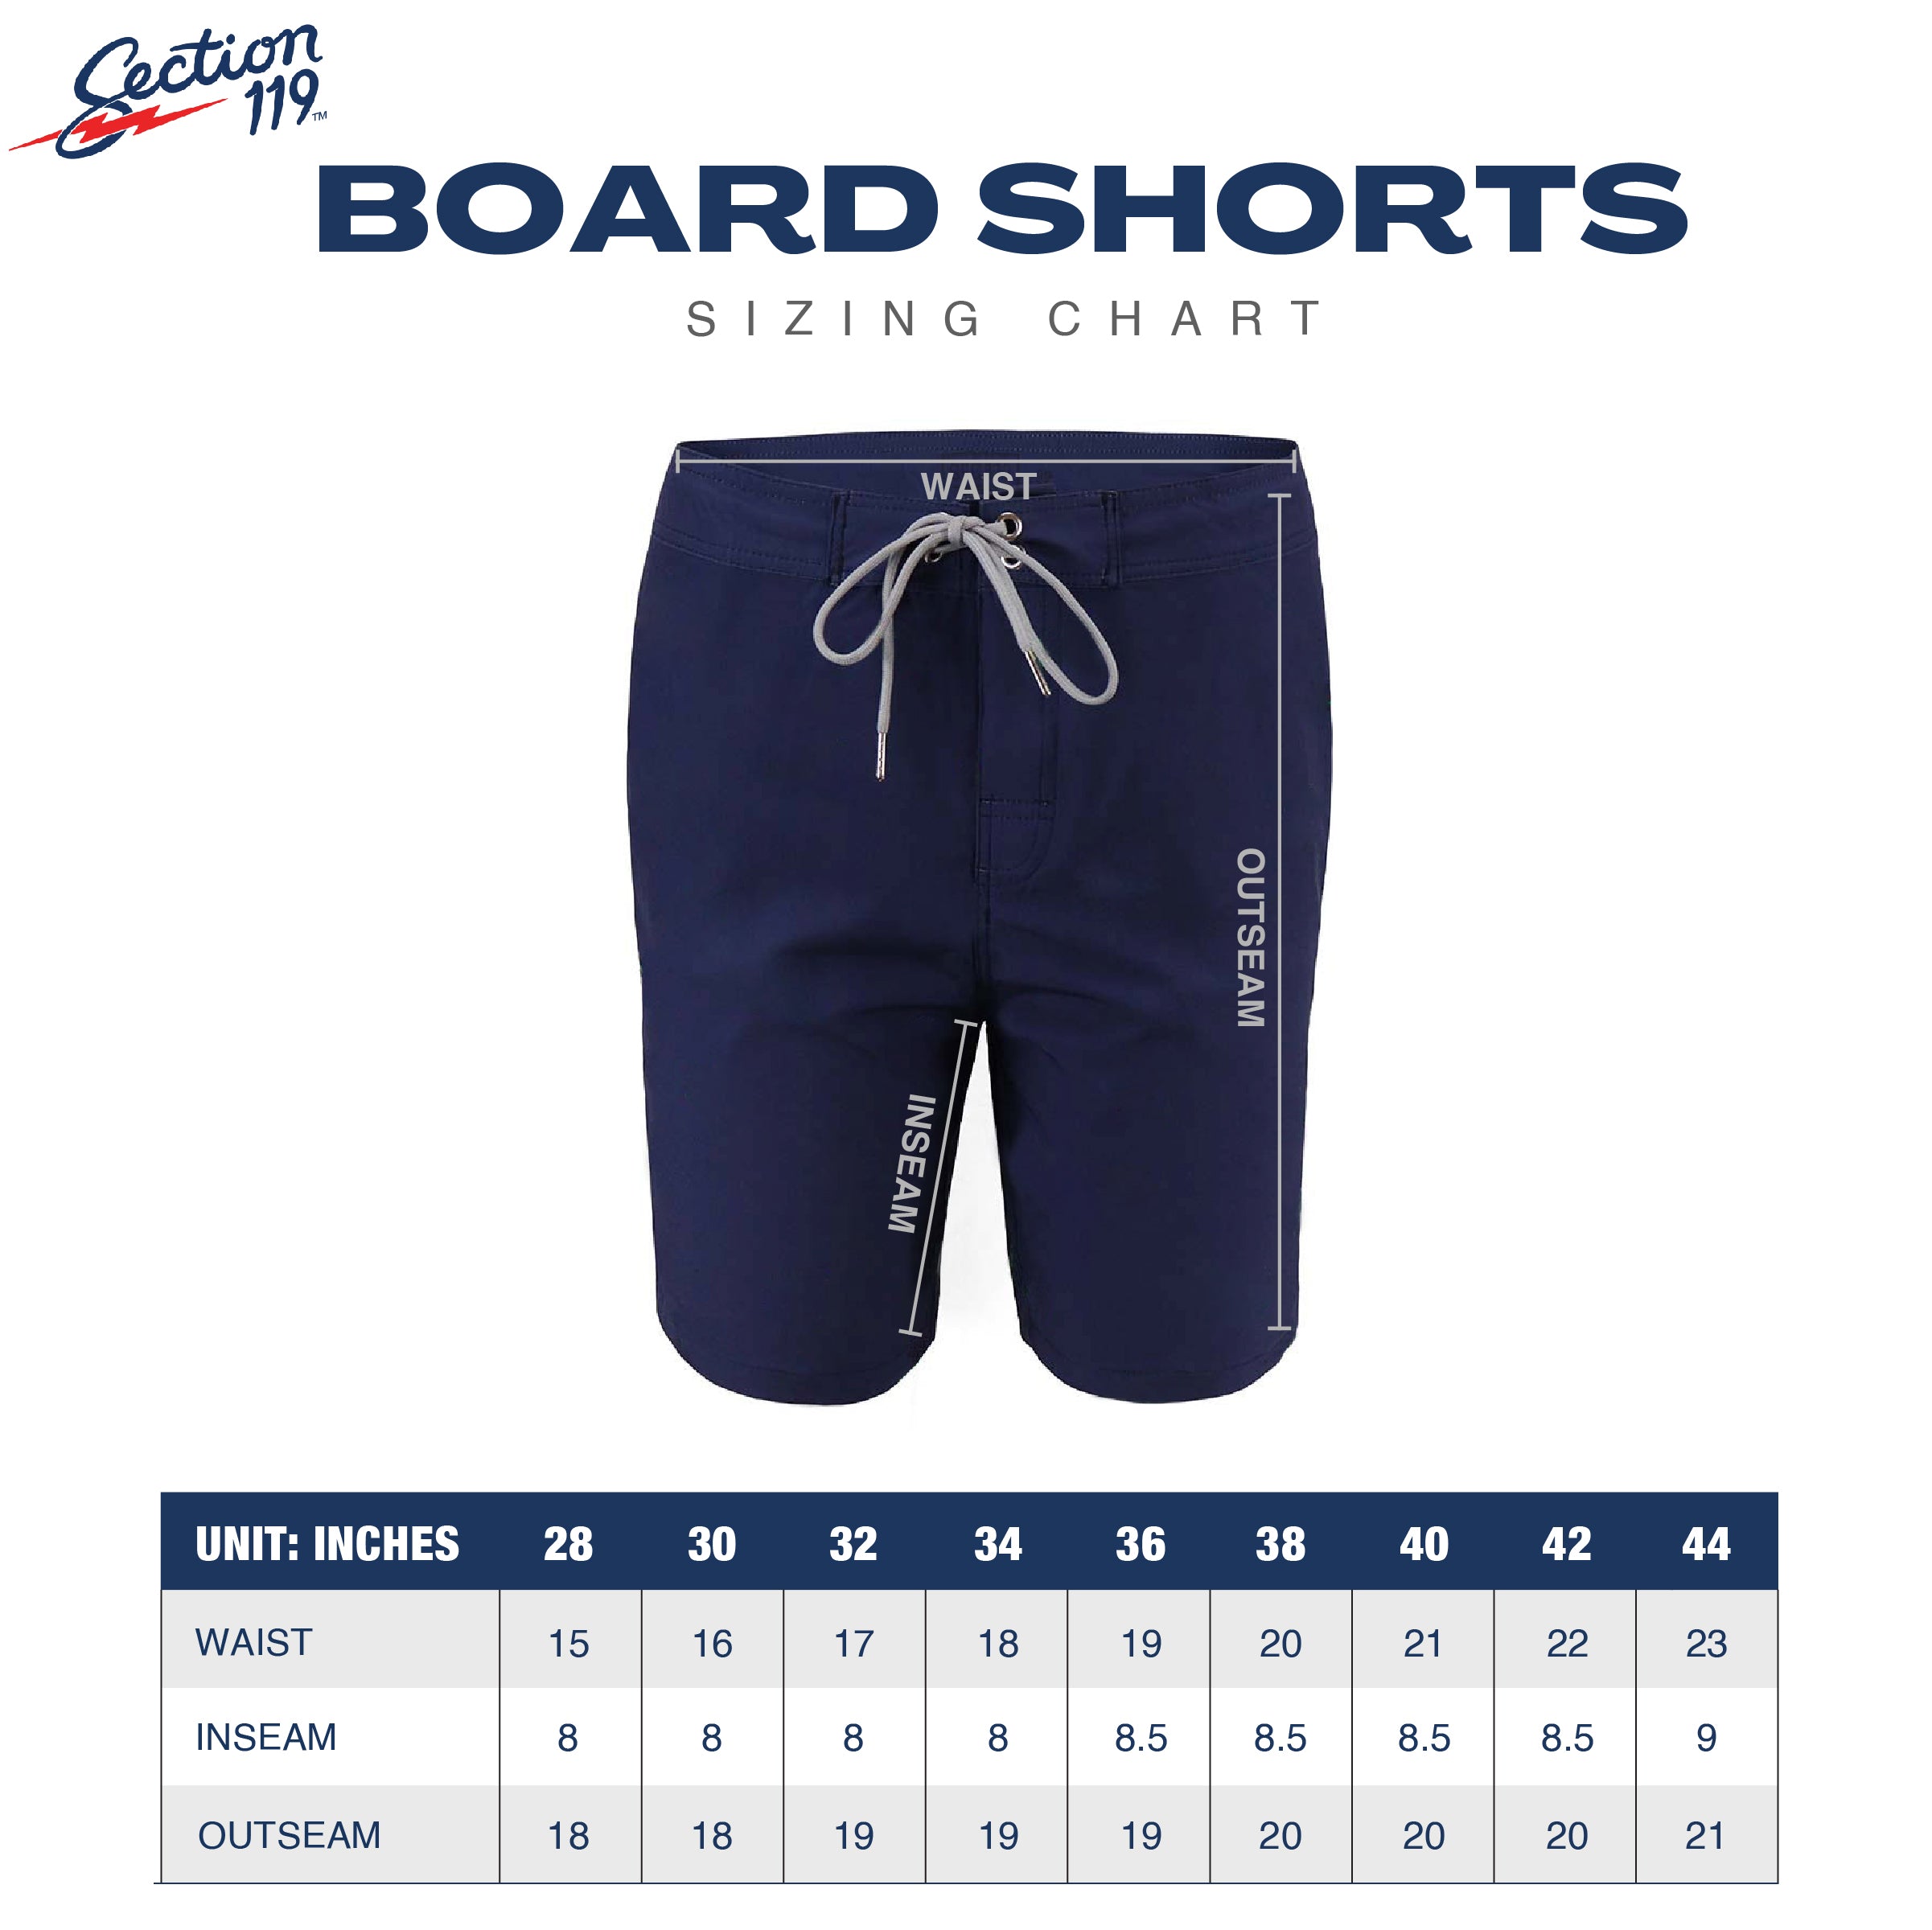 Donut Believe The Florist Board Shorts - Section 119